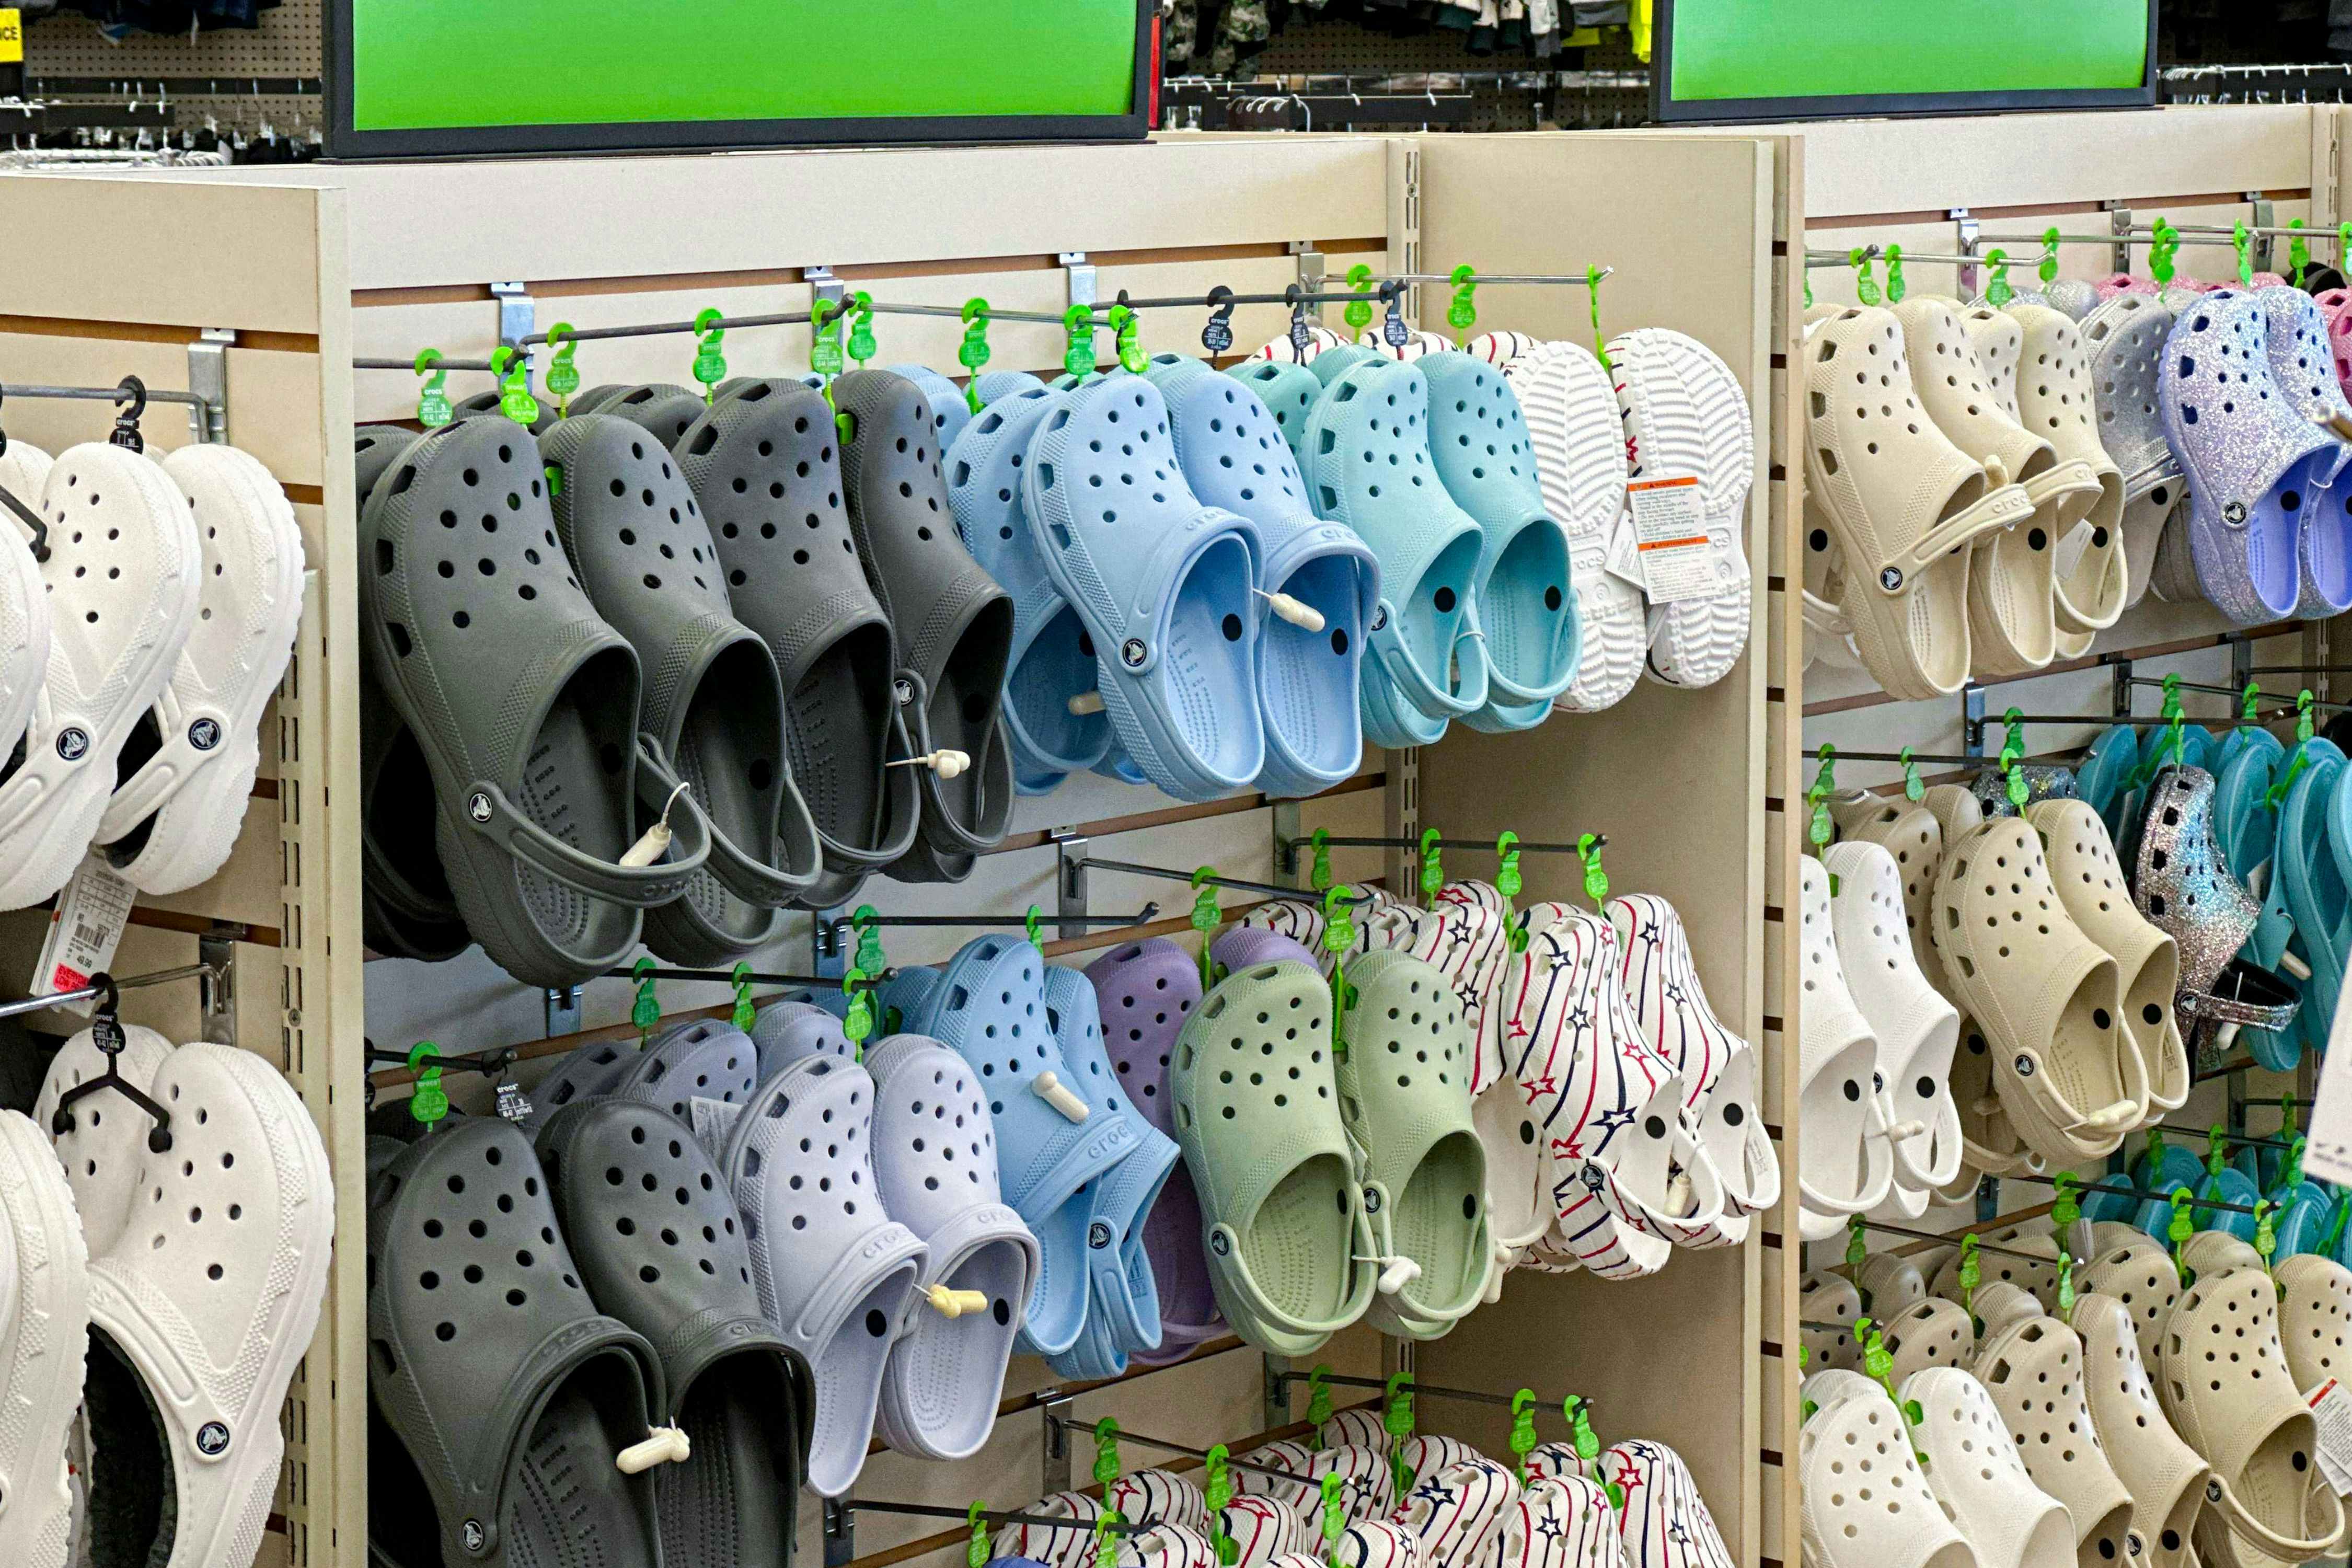 Double the Fun: 2 Pairs of Crocs, as Low as $50